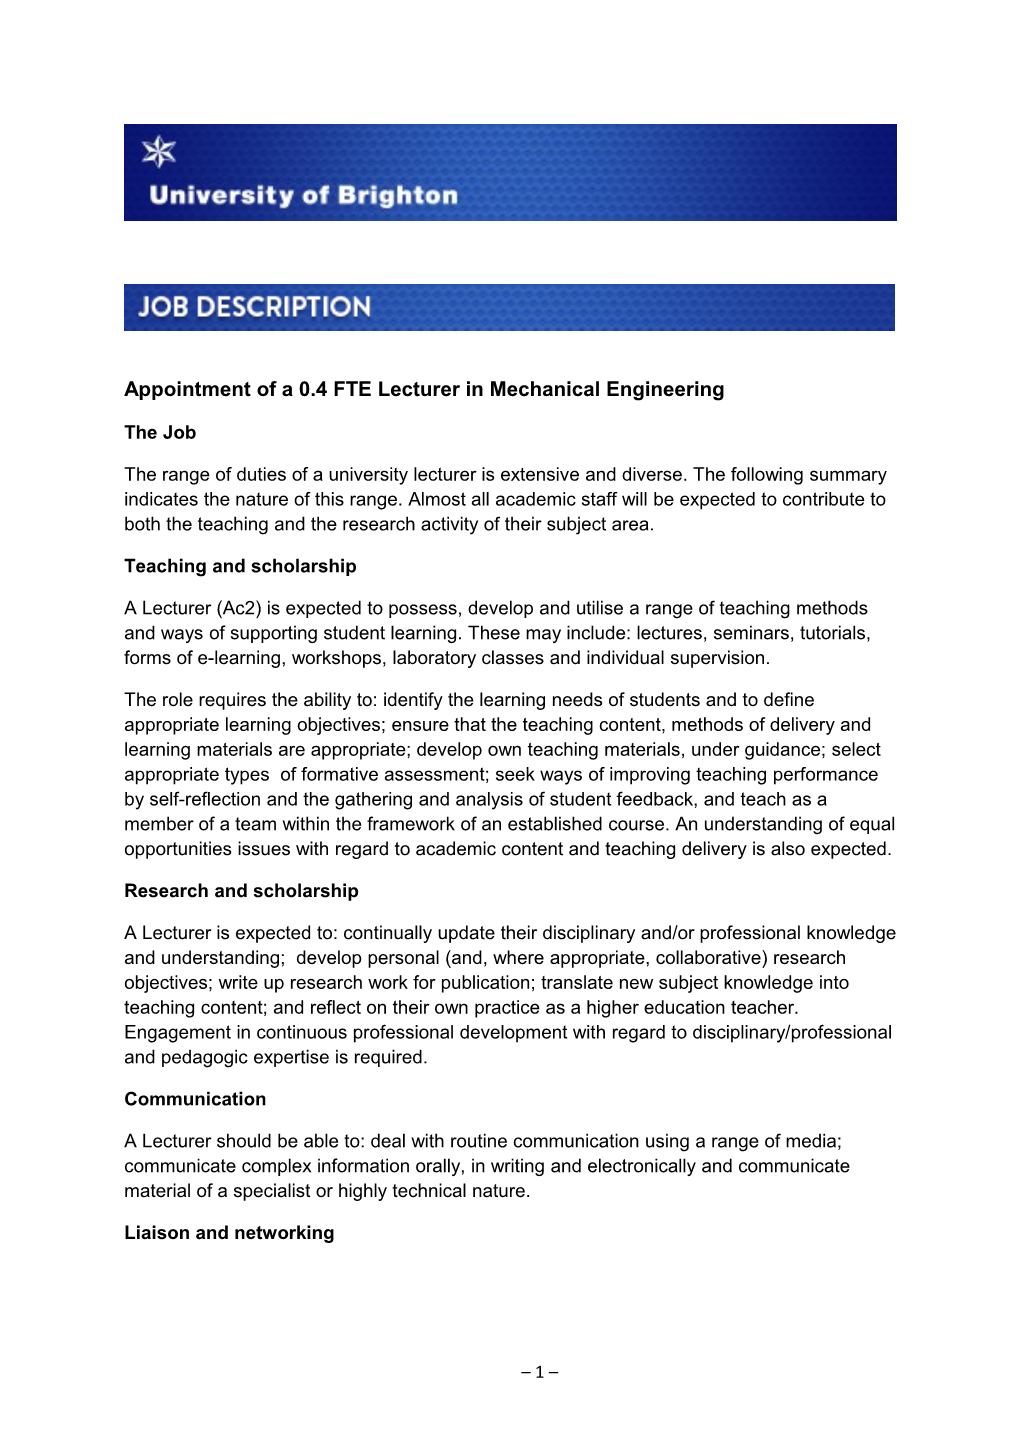 Appointment of a 0.4 FTE Lecturer in Mechanical Engineering